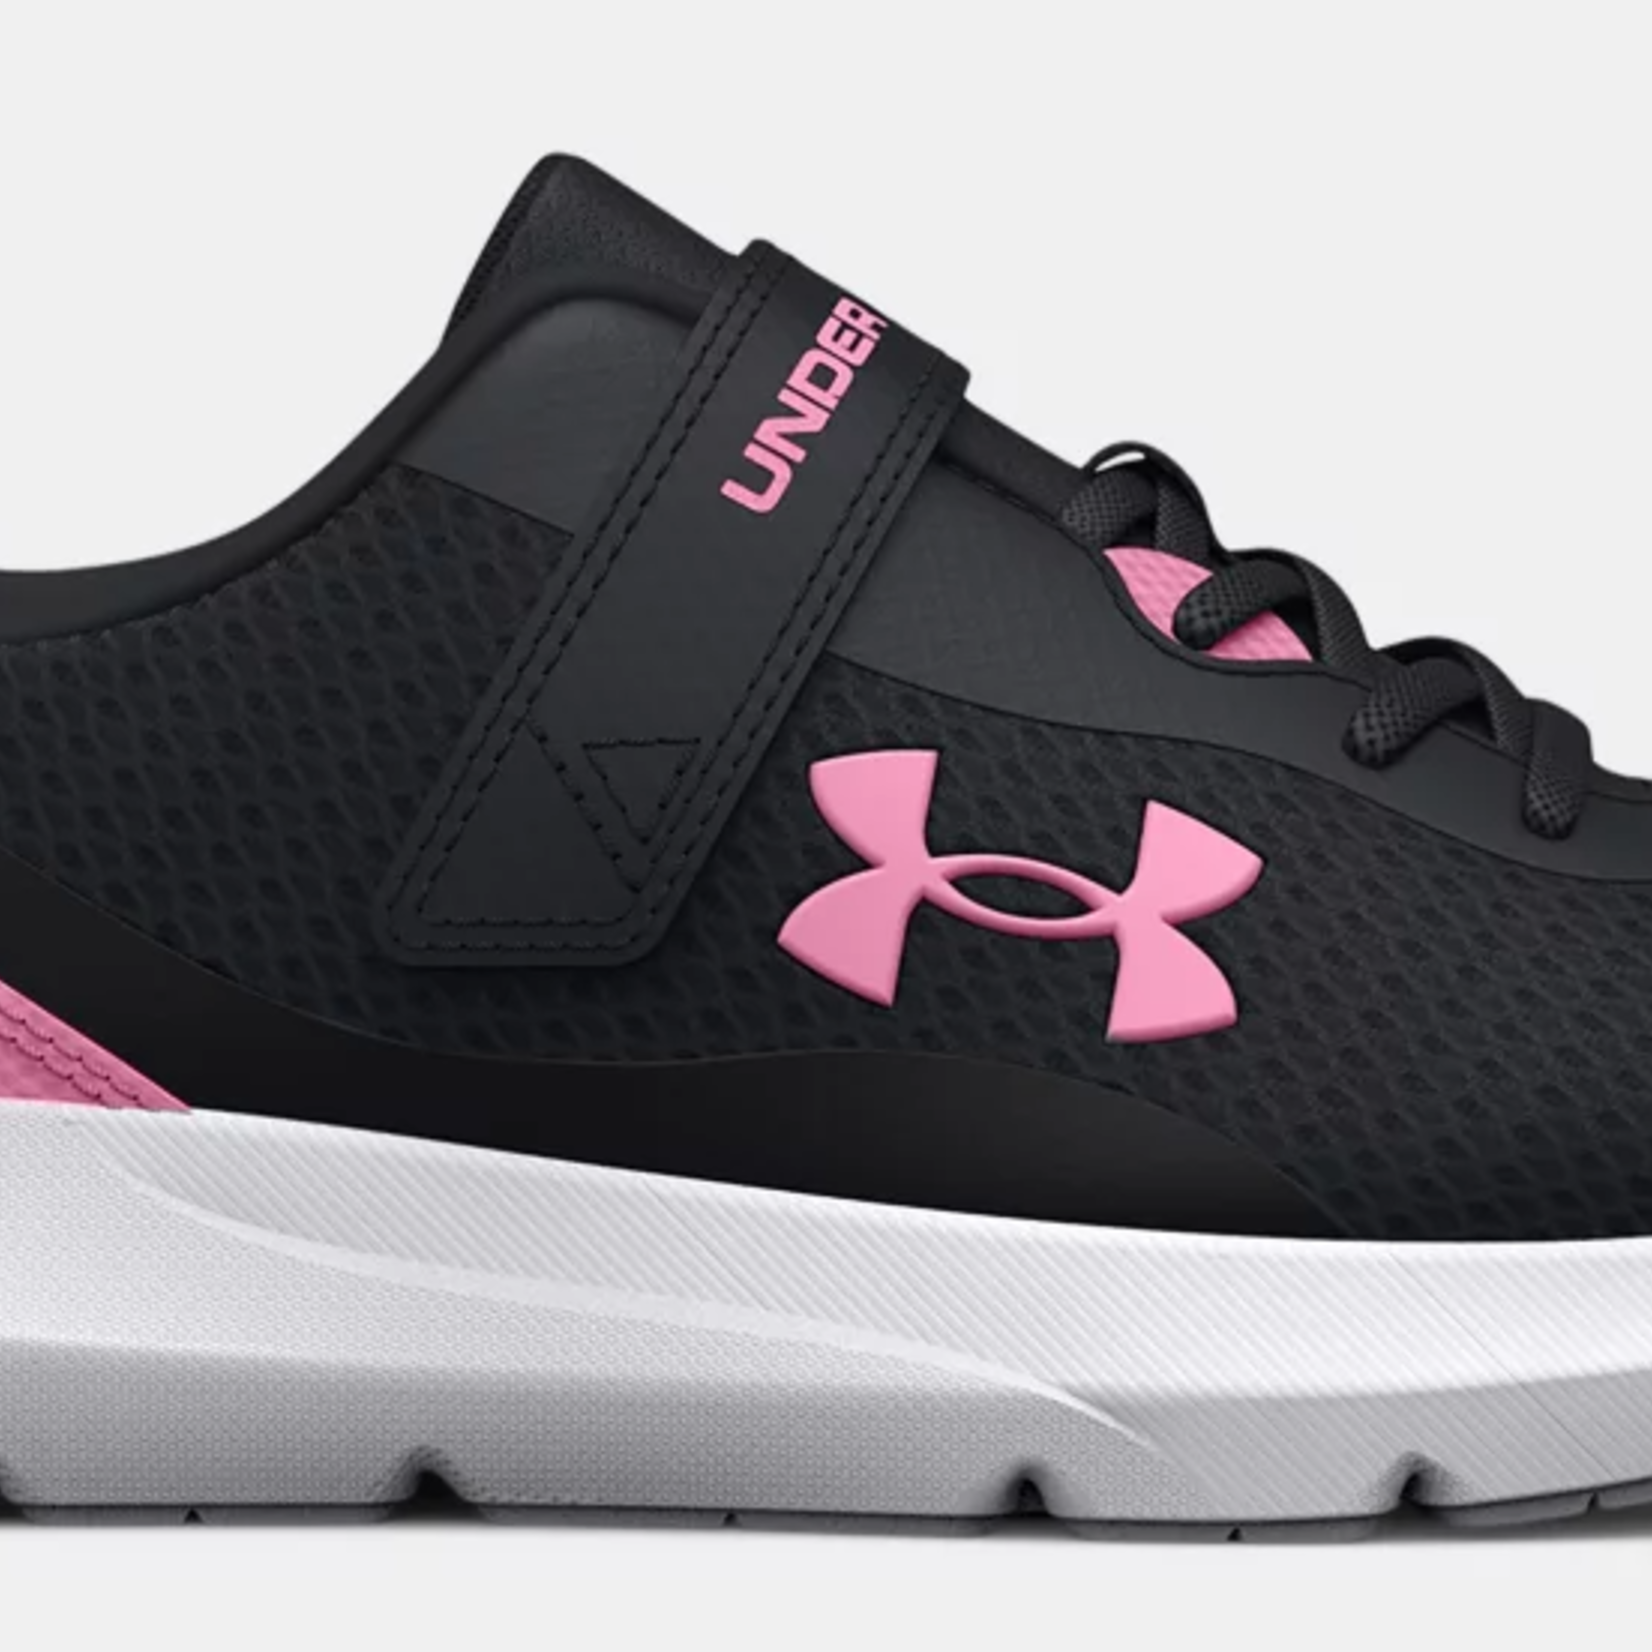 Under Armour Under Armour Running Shoes, Surge 3 AC, GPS, Girls